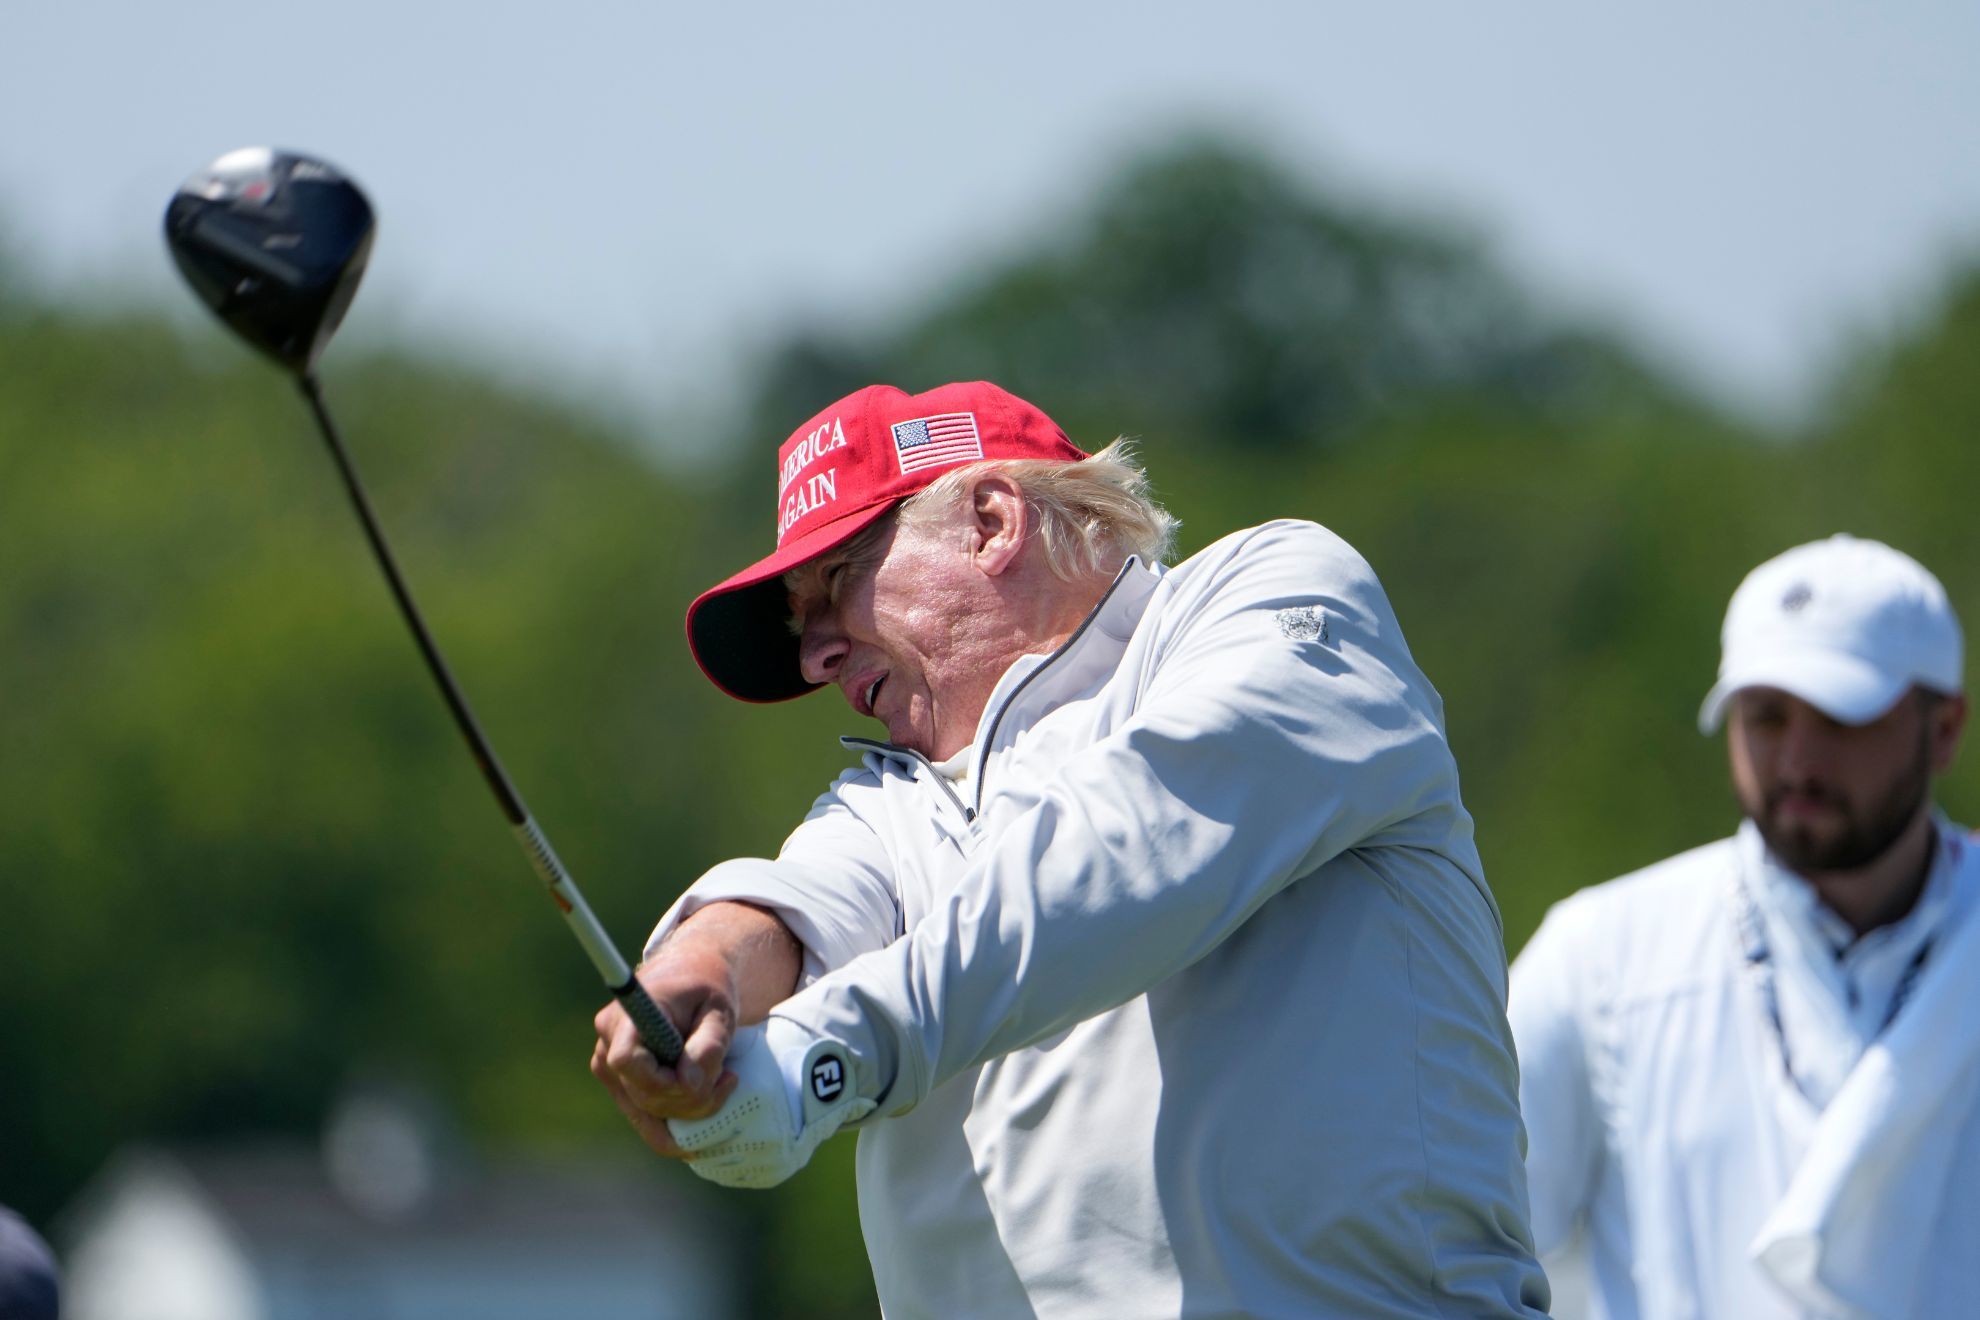 Donald Trump shows off skills during LIV Golf tournament hosted at his club